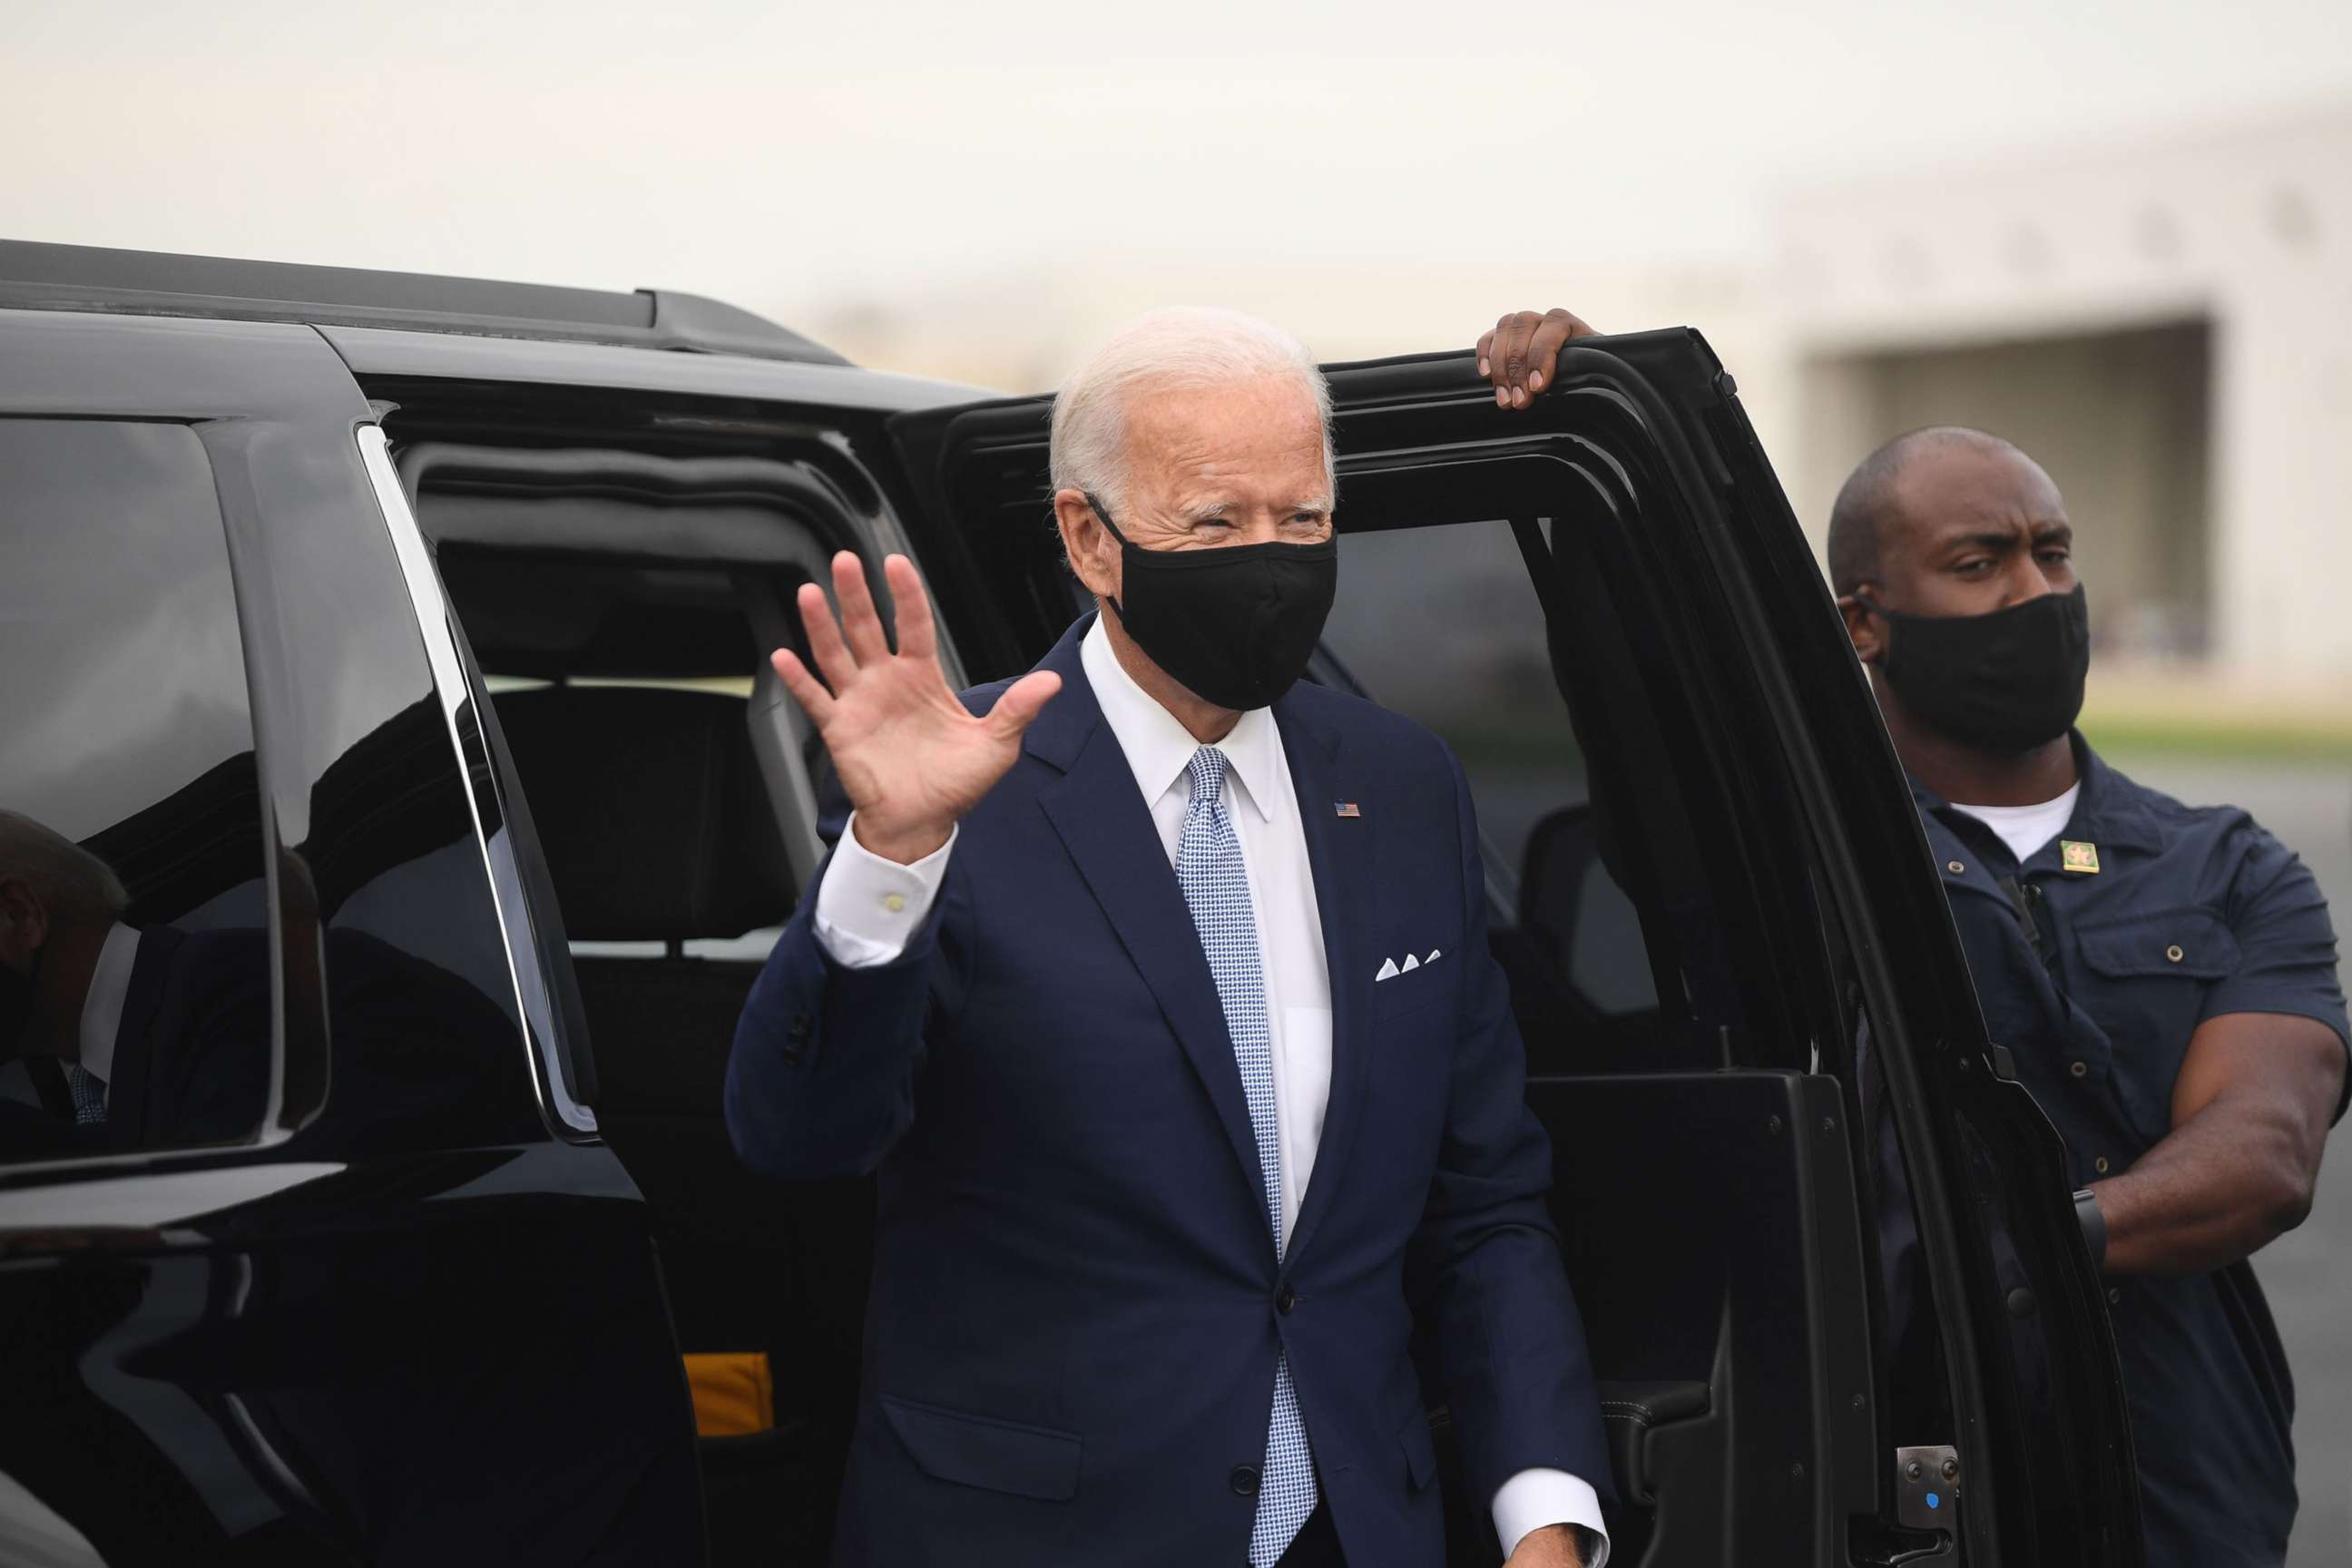 PHOTO: Democratic presidential nominee former Vice President Joe Biden boards an airplane at New Castle Airport in New Castle, Del., Aug. 31, 2020, as he travels to Pennsylvania for campaign events.